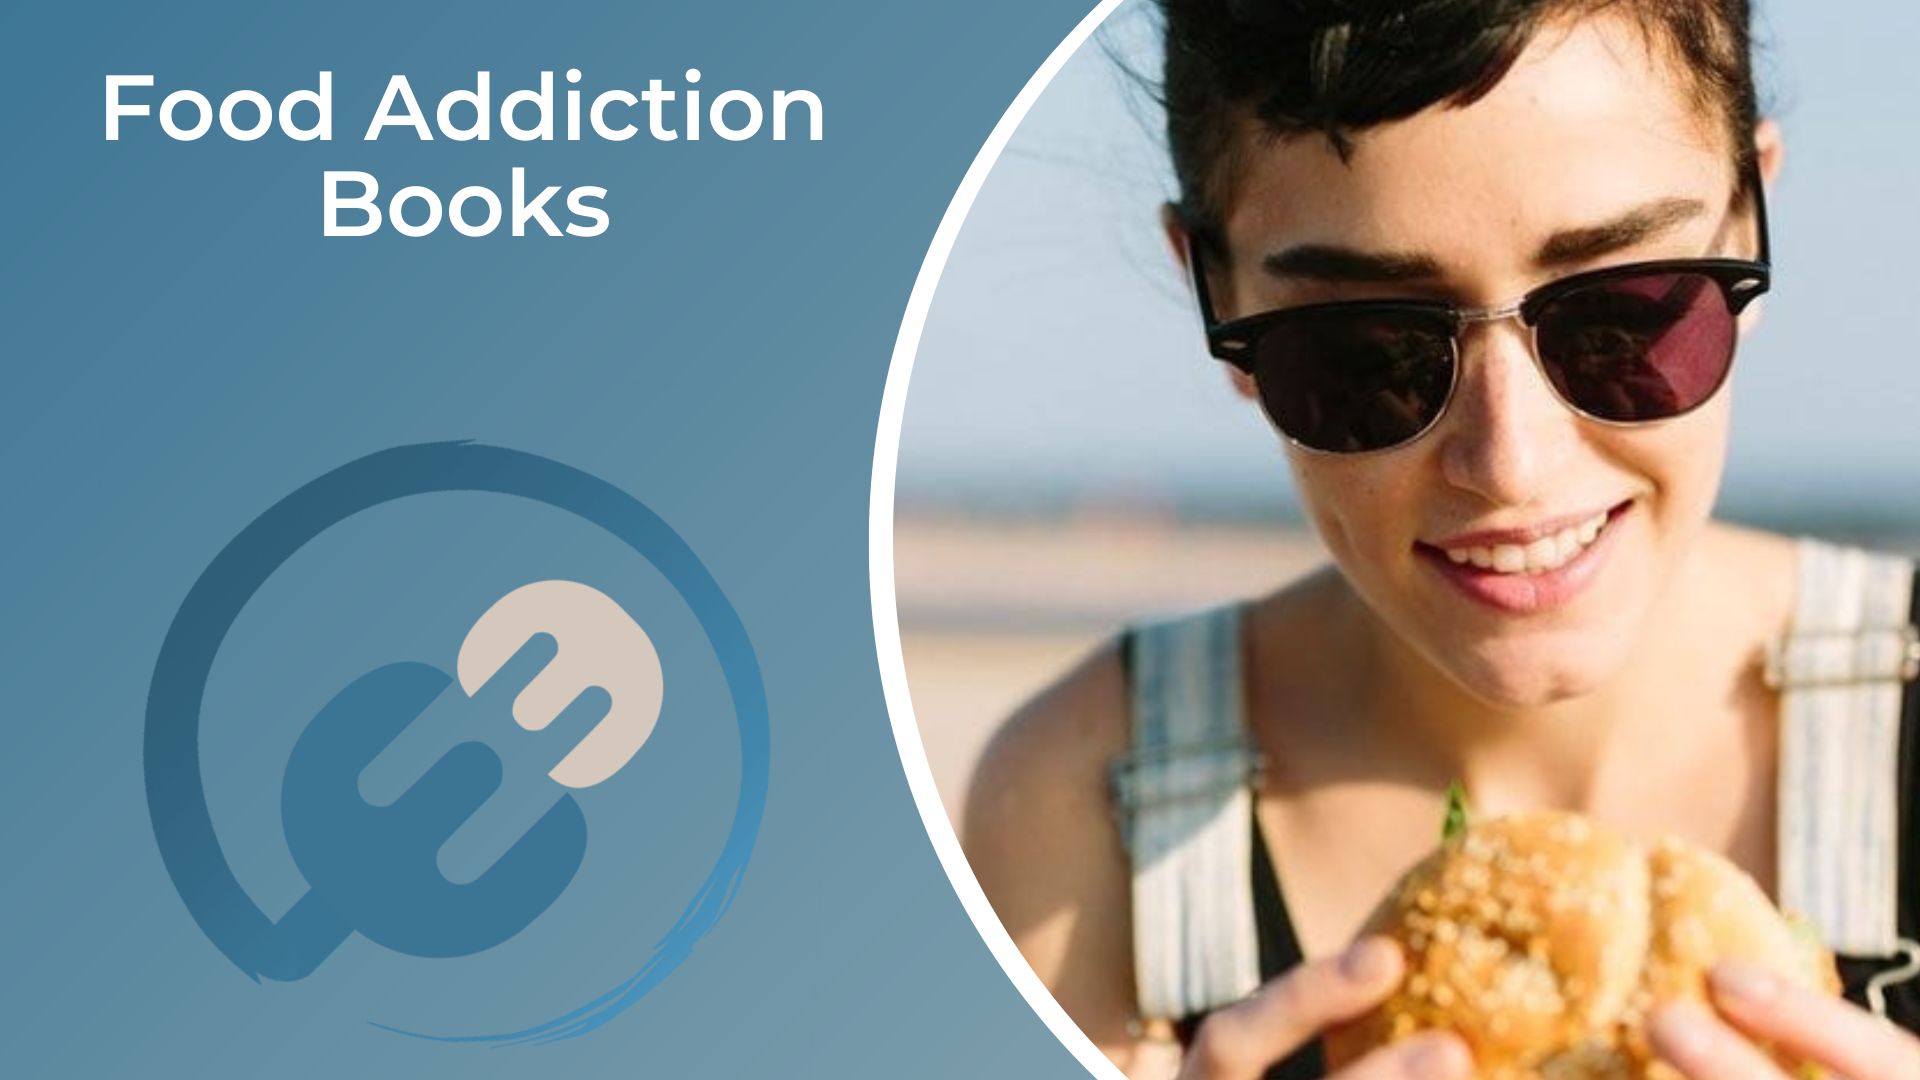 Food Addiction Books Essential Guides to Overcoming the Cycle of Binging (1)